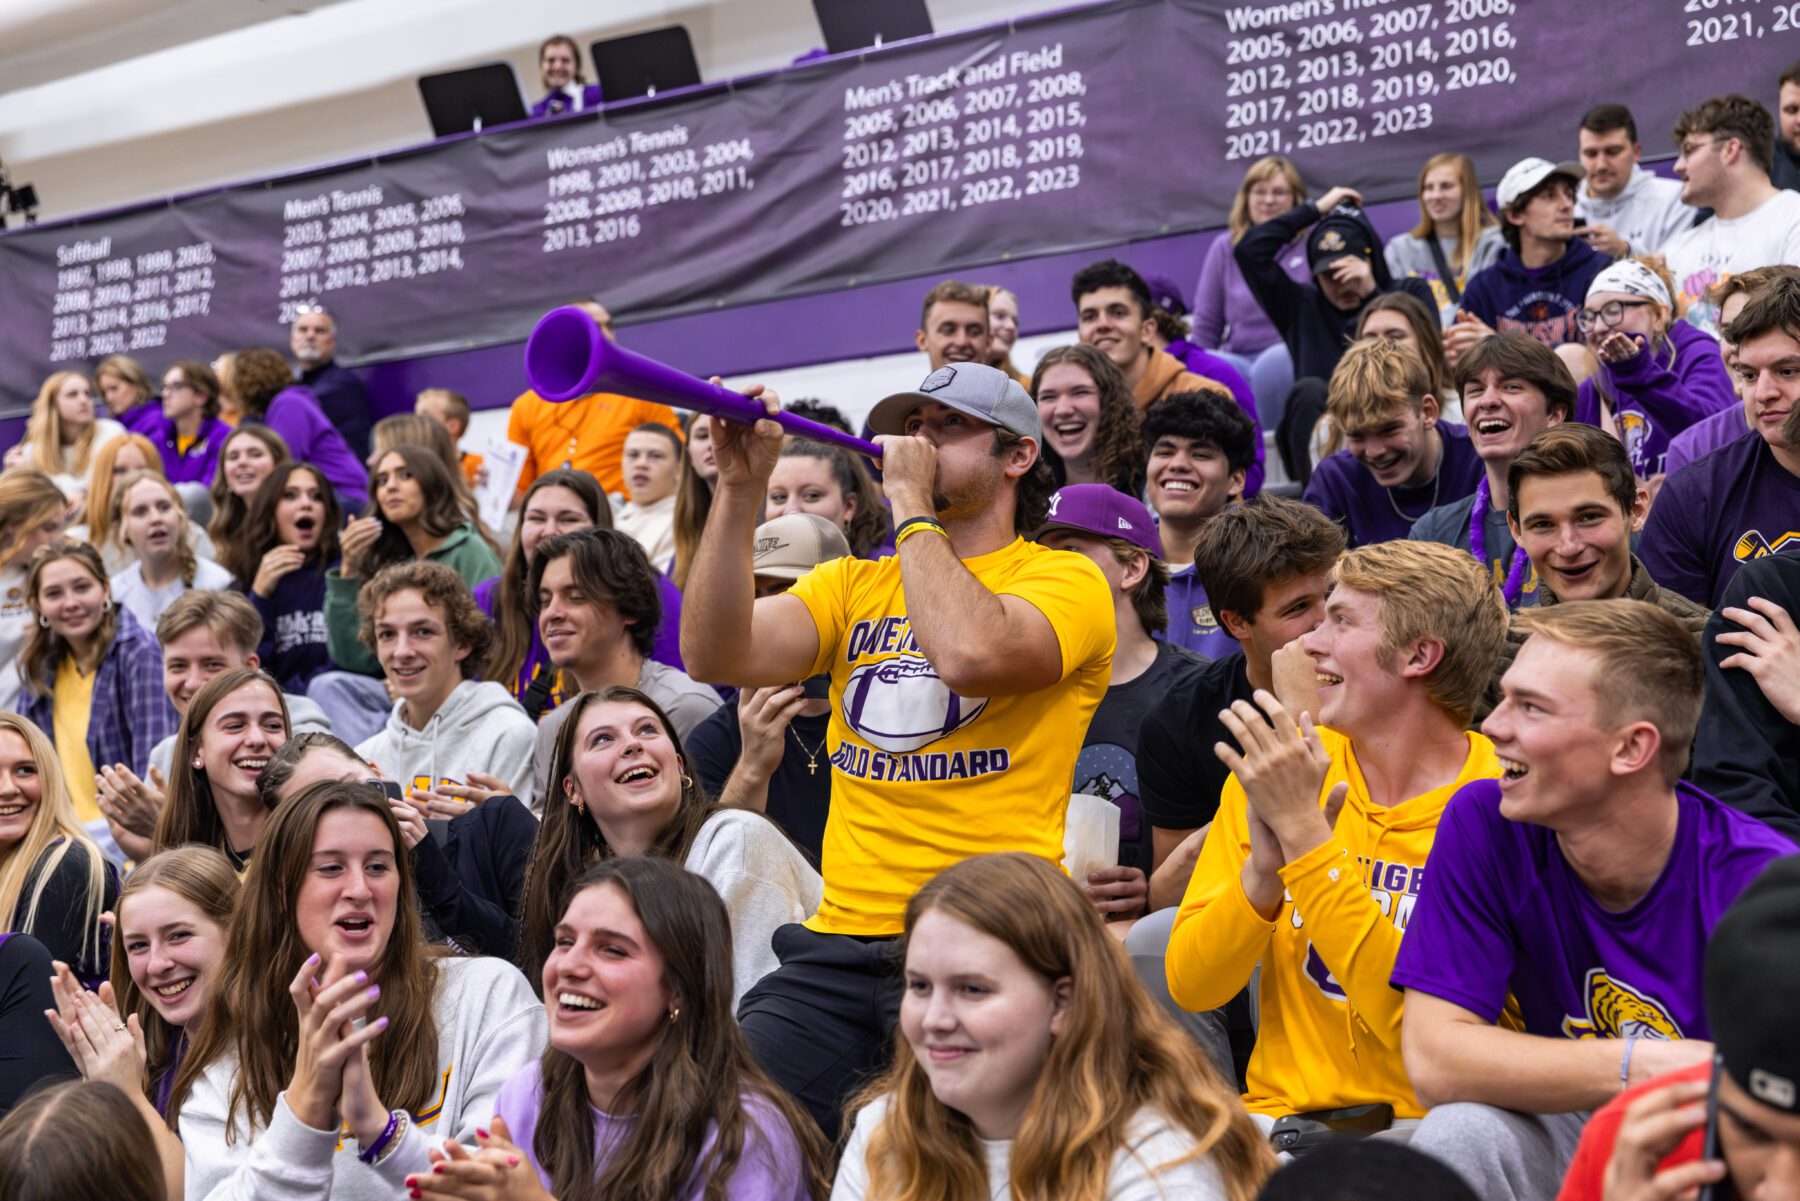 Fans at the Basketball game cheer in support for Olivet.